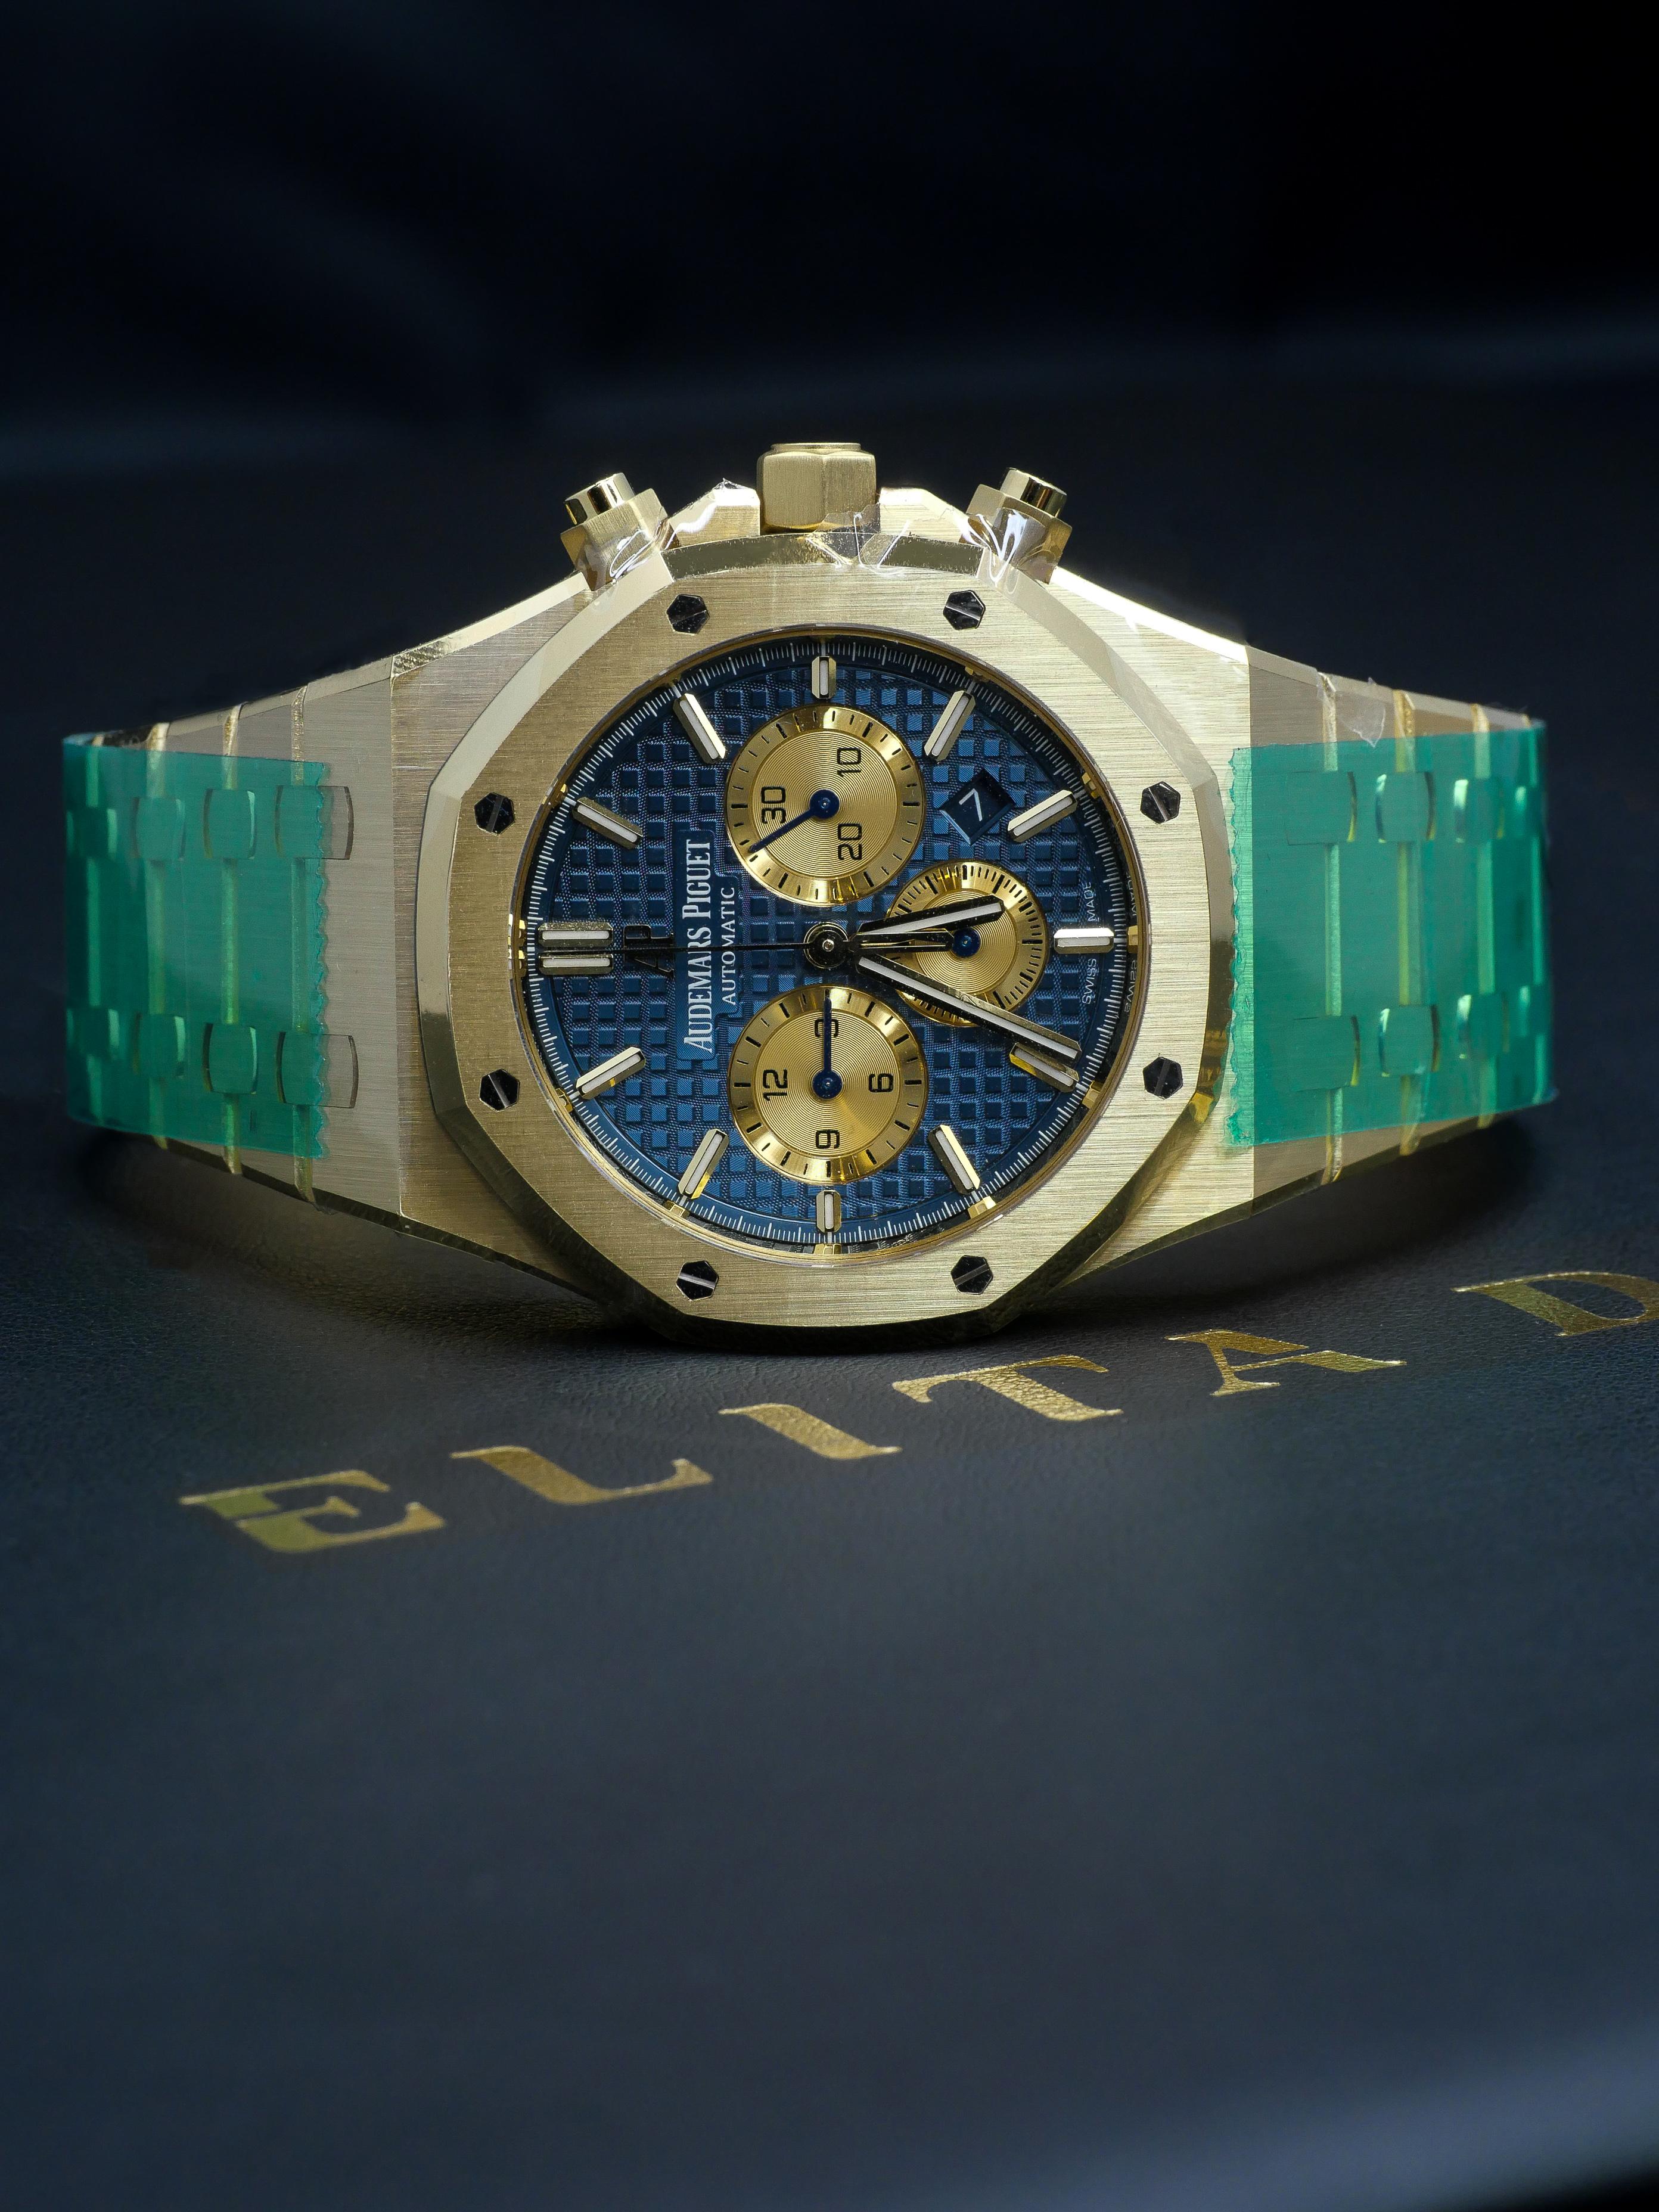 Audemars Piguet Royal Oak Chronograph 41mm 18K Yellow Gold Blue Dial

Powered by the Audemars Piguet calibre 2385, this three-counter chronograph energises the original Gerald Genta design from the early 70s. The 41 mm case houses a “Grande